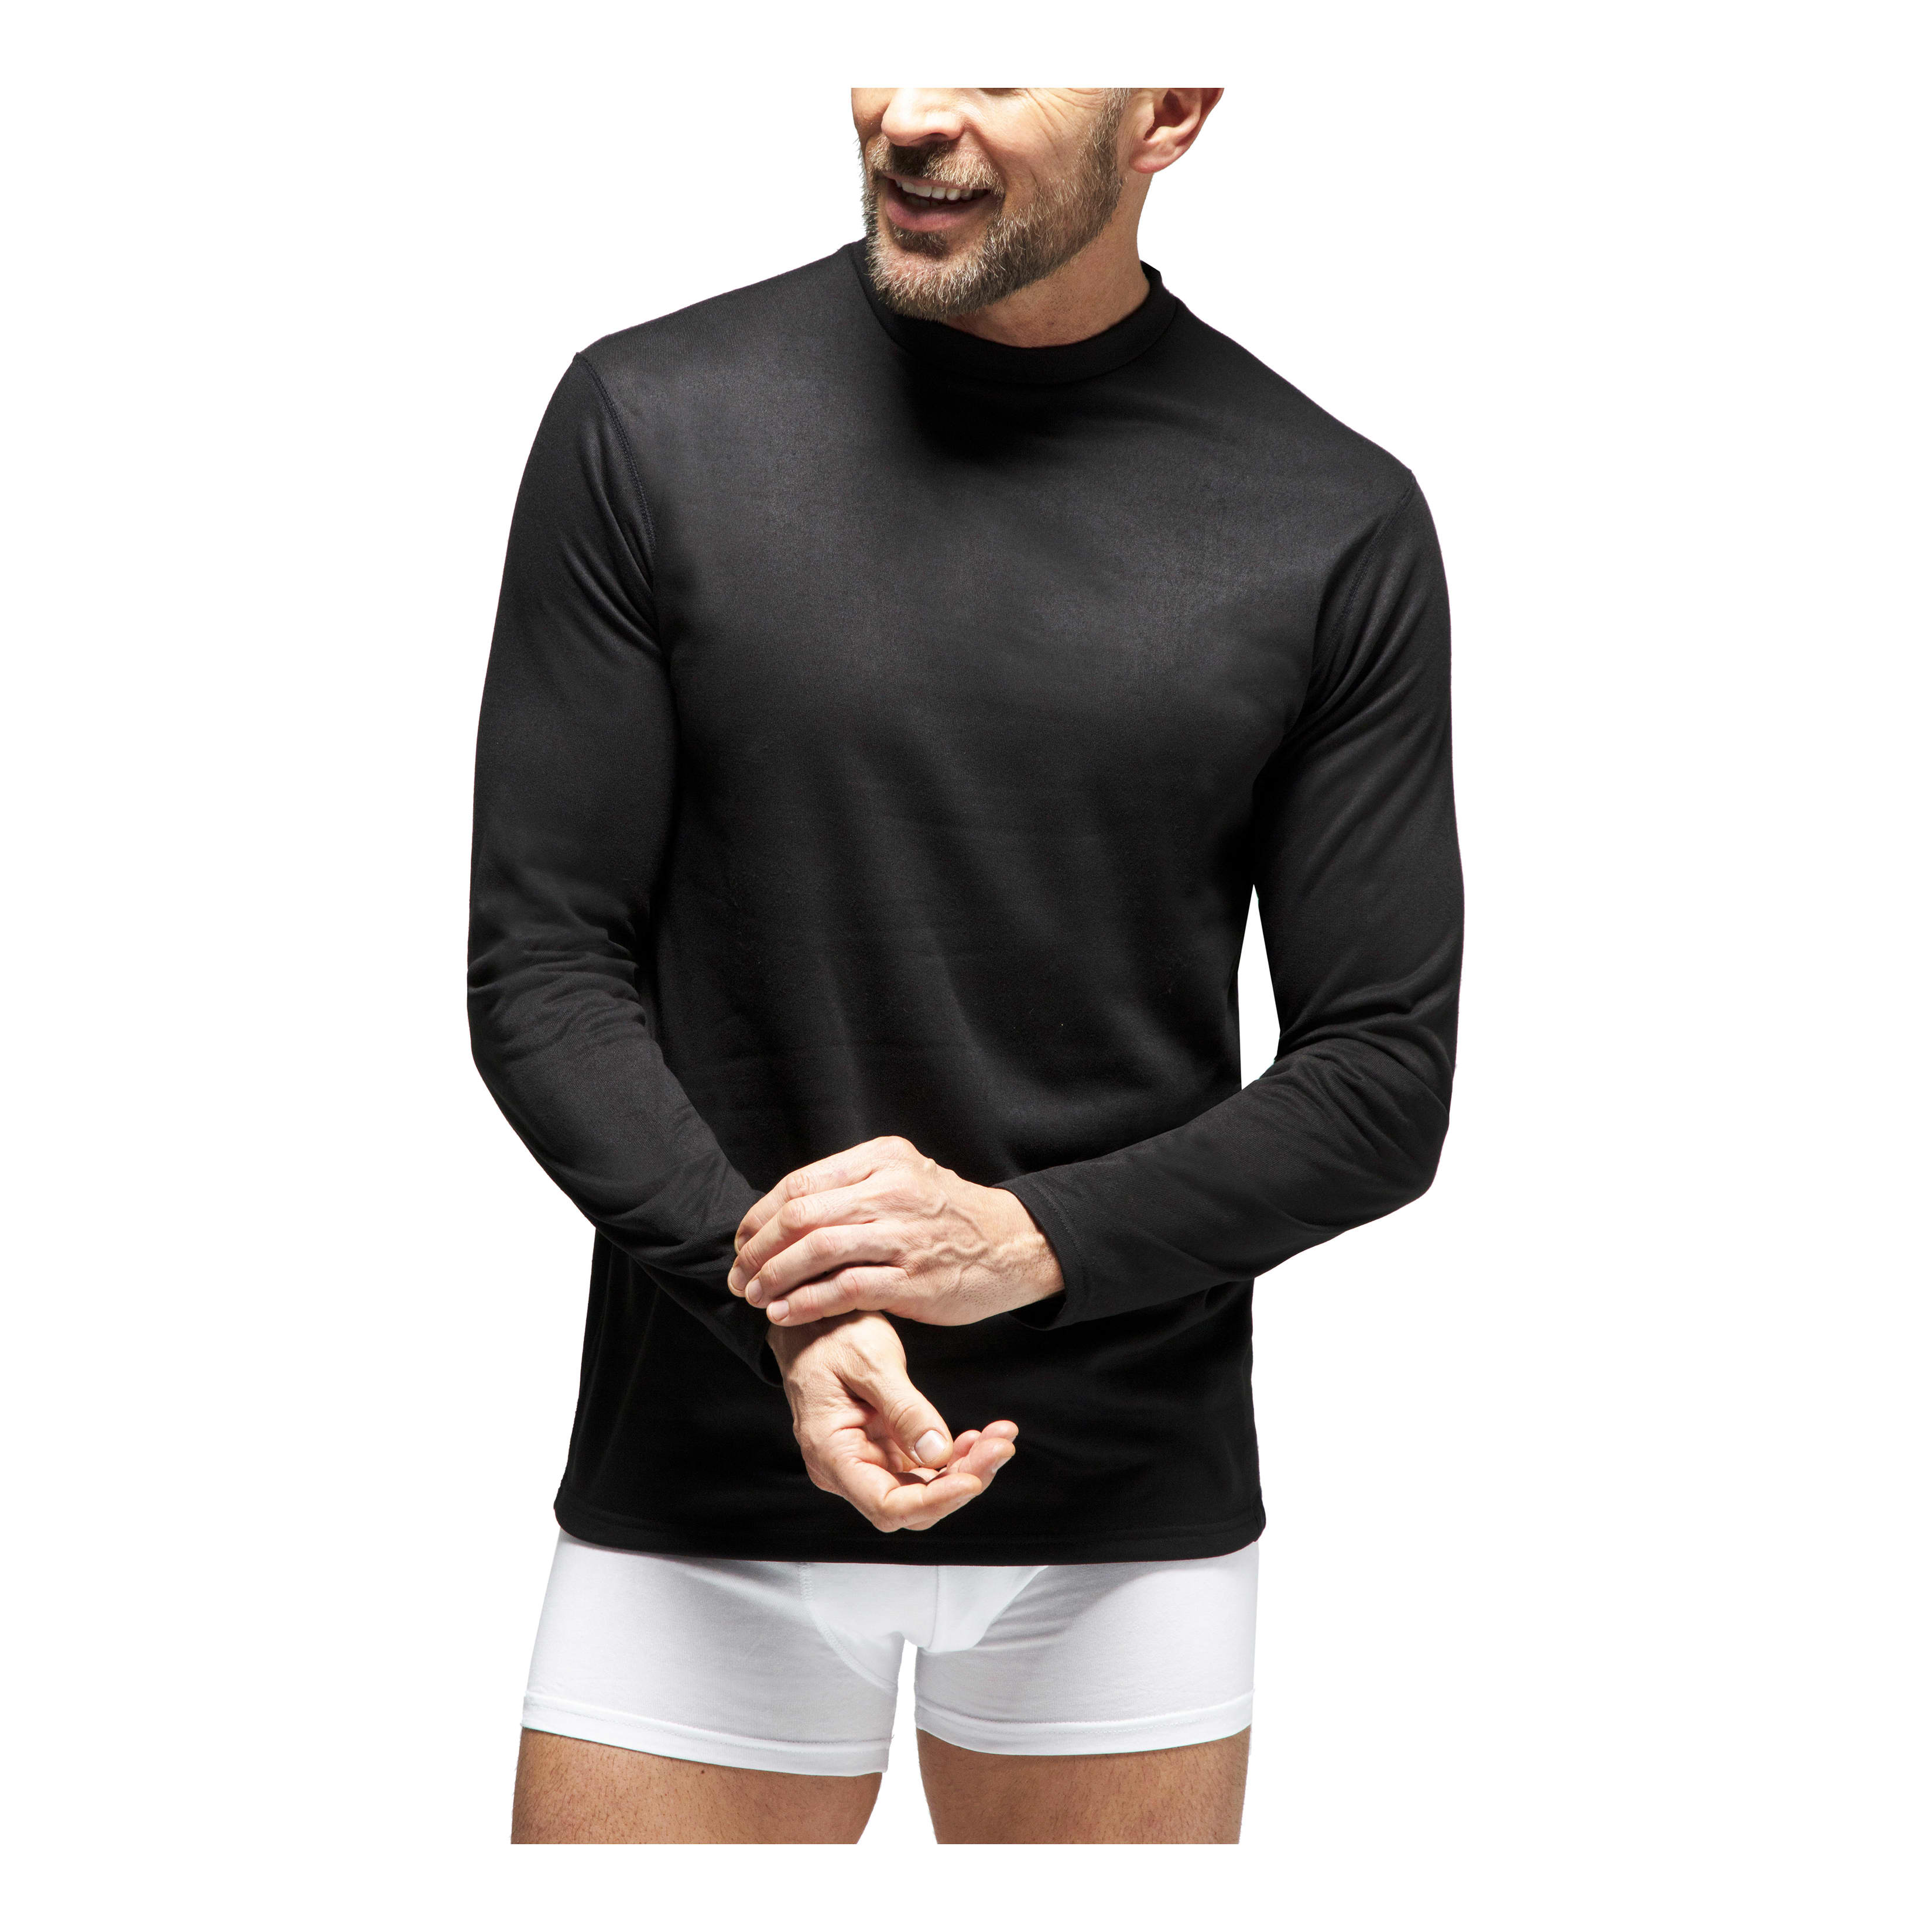 Thermal Shirts for Men Long Sleeve Shirts for Men Thermal